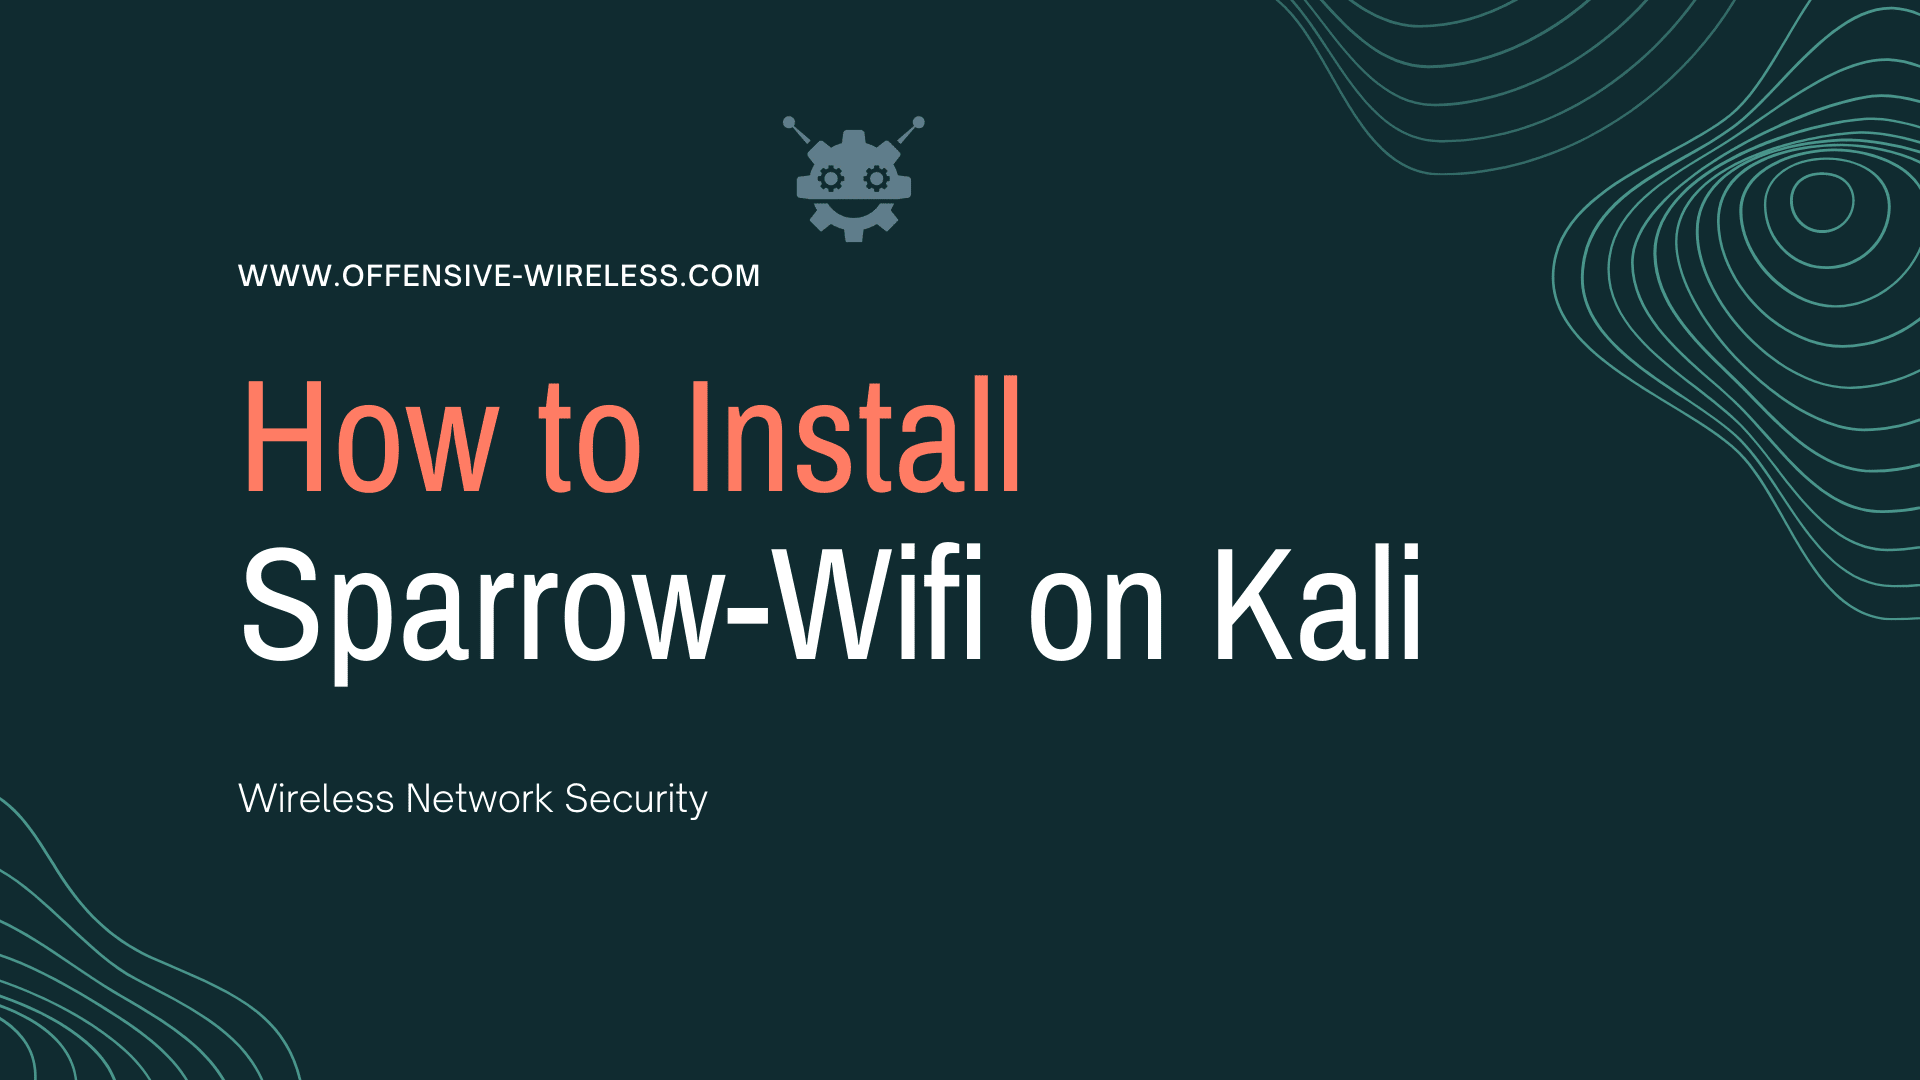 How to Install Sparrow-Wifi on Kali